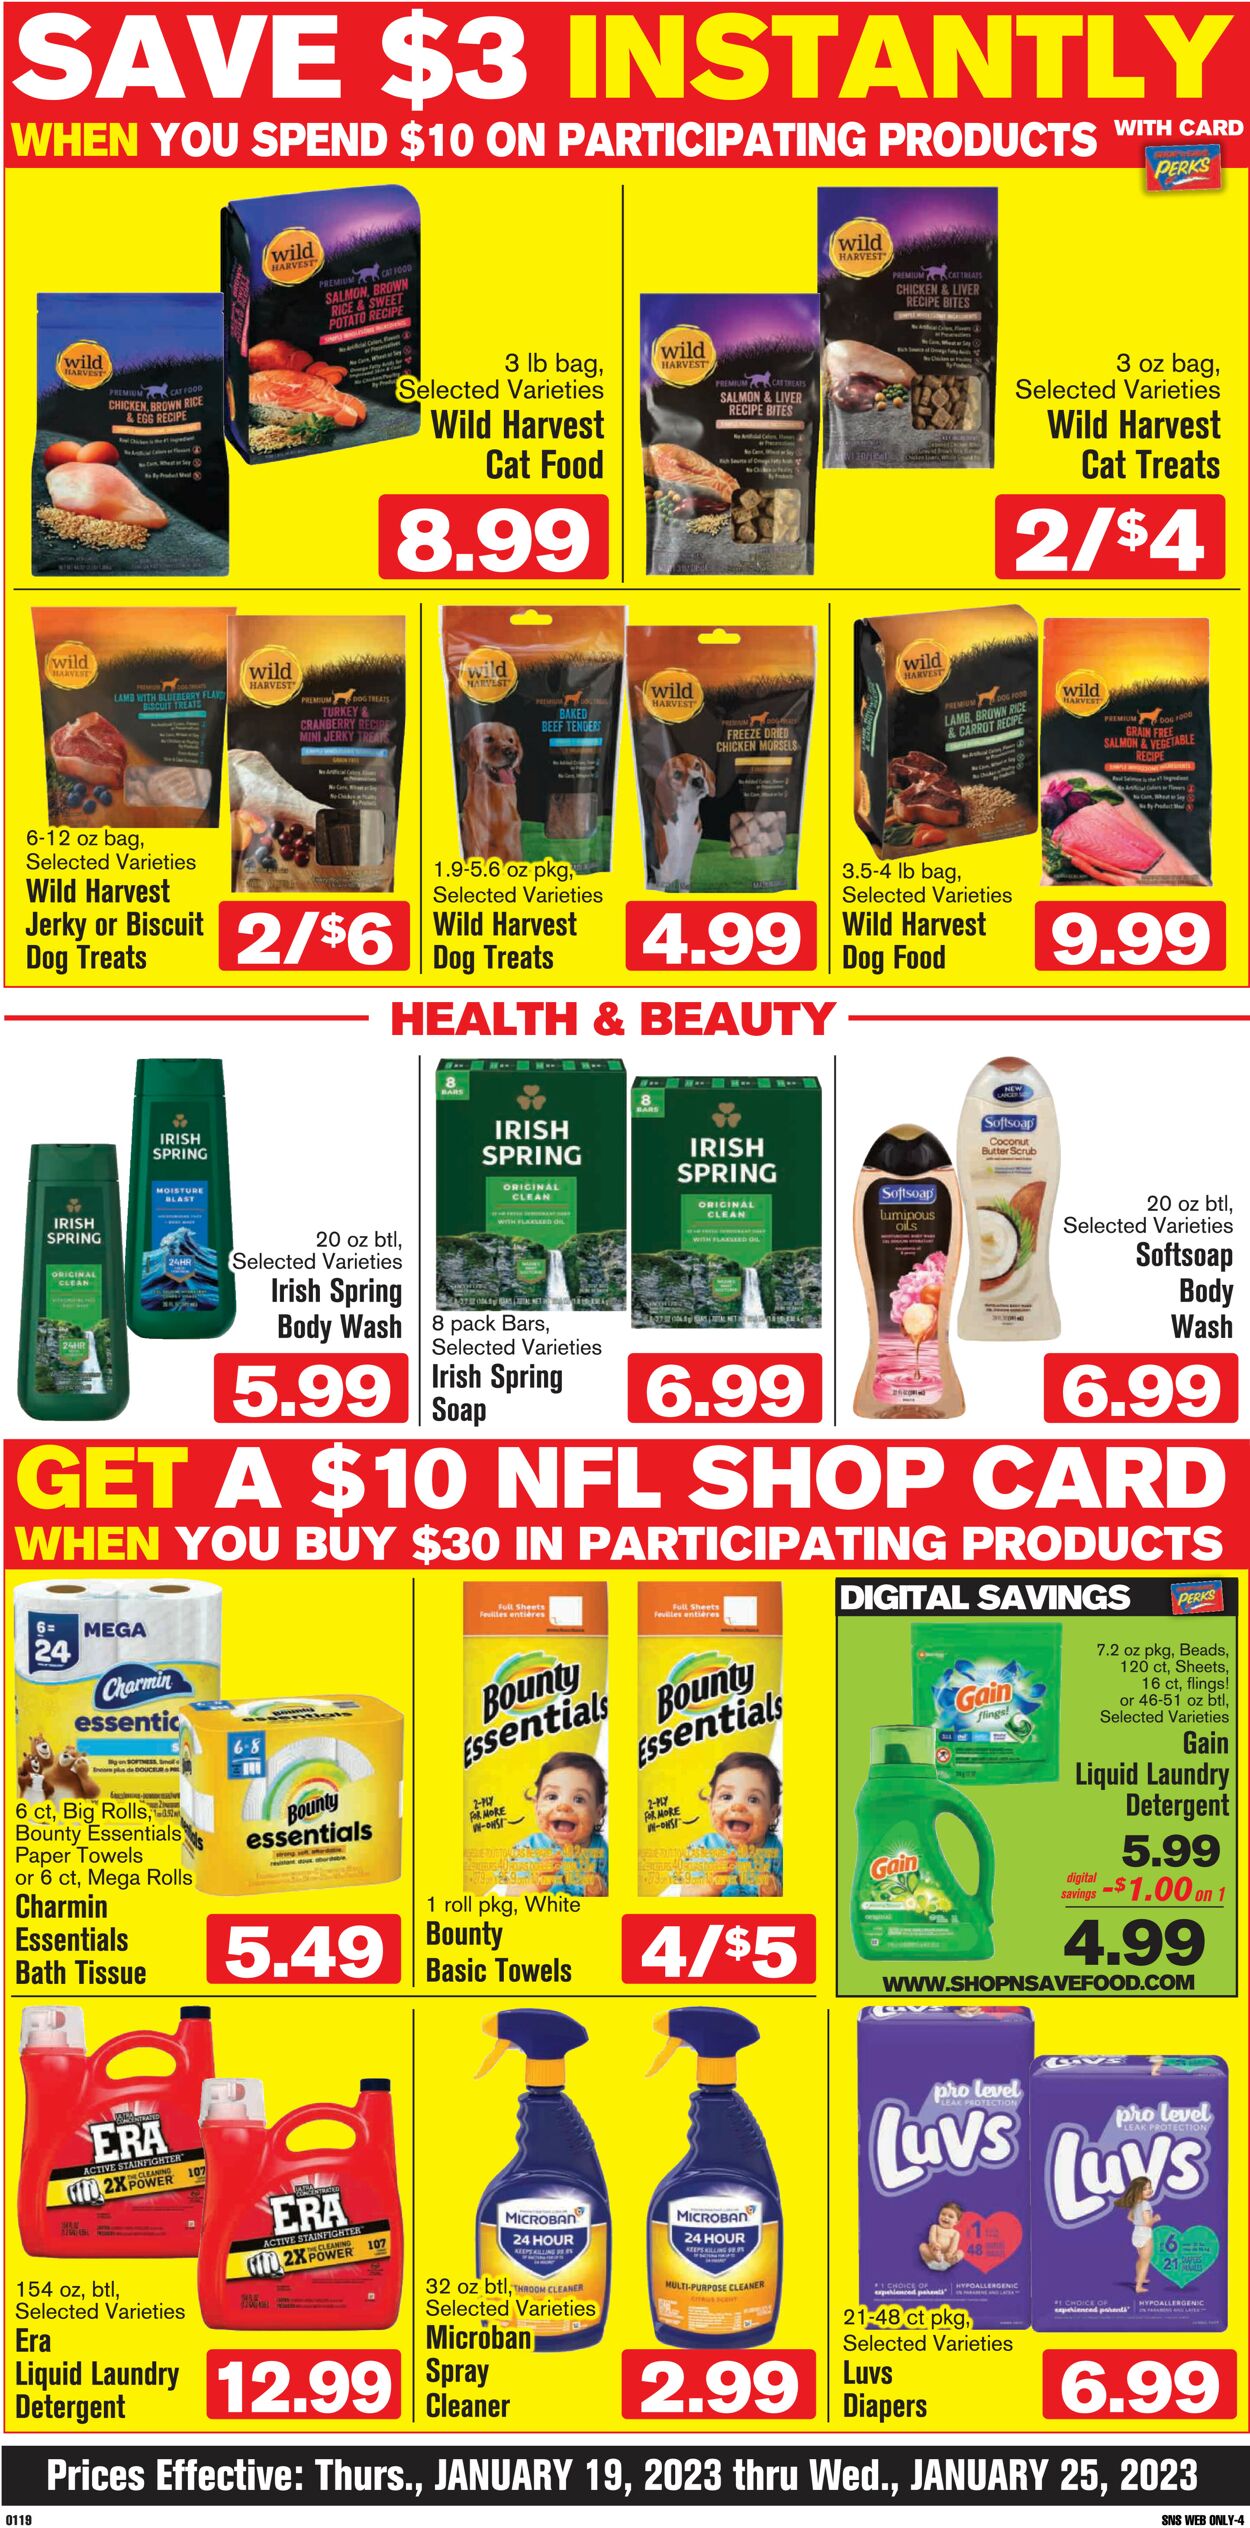 Shop ‘n Save (Pittsburgh) Ad from 01/19/2023